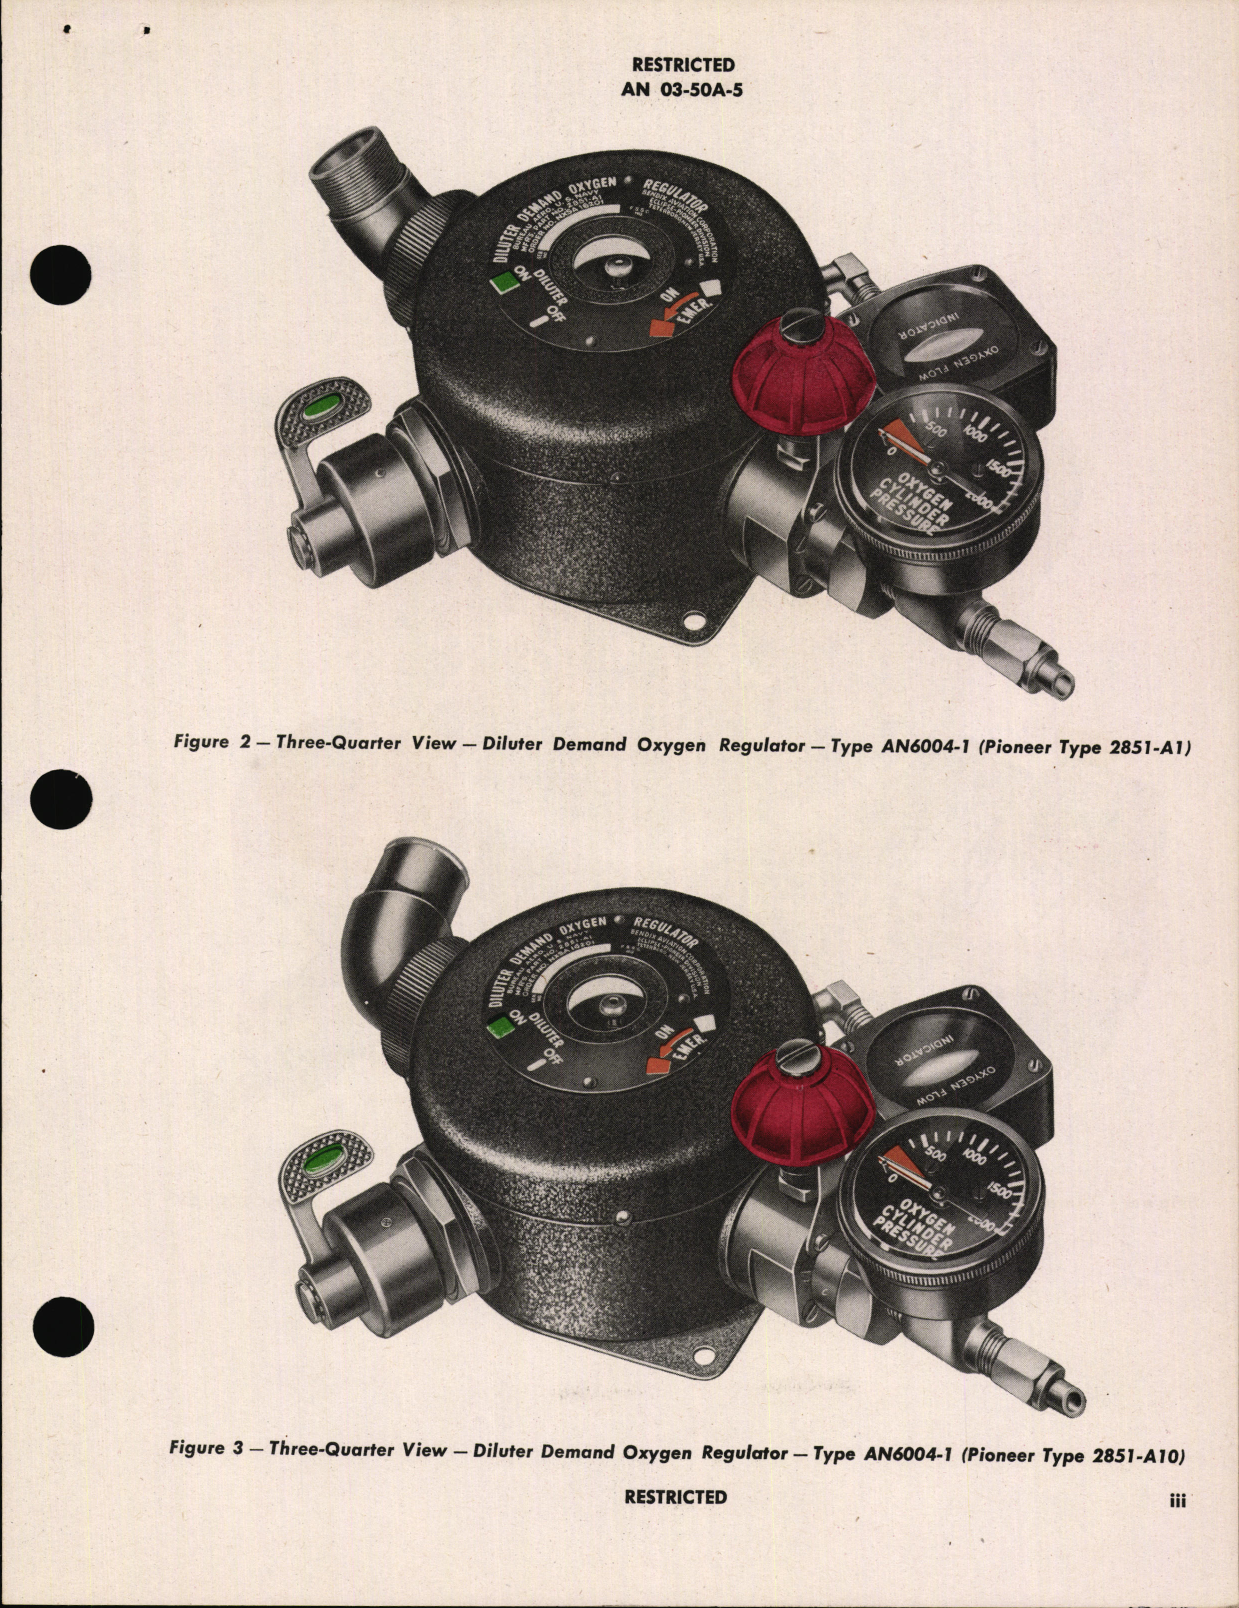 Sample page 5 from AirCorps Library document: Operation, Service and Overhaul Instructions with Parts Catalog for Diluter Demand Oxygen Regulators